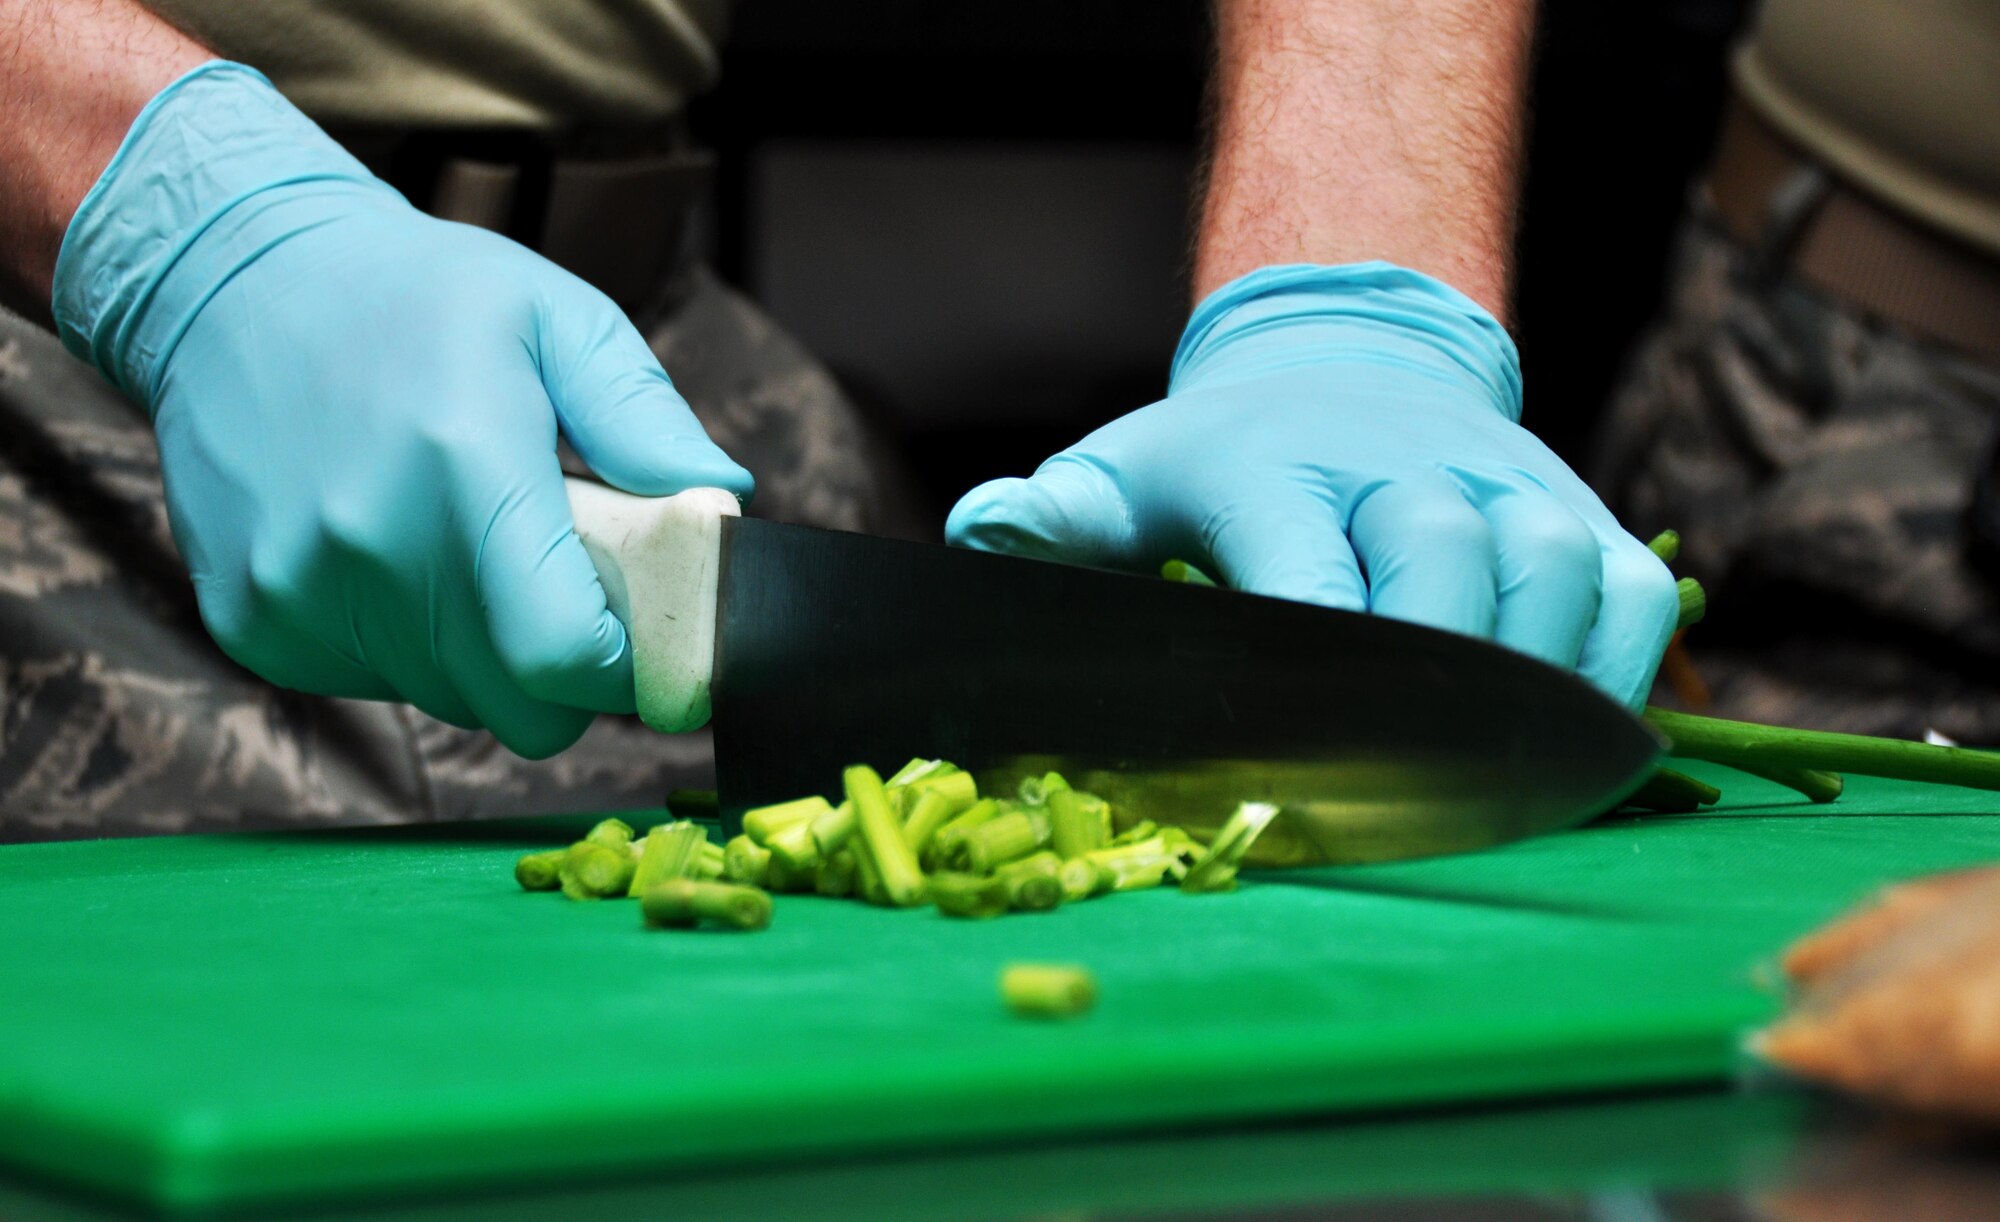 Senior Airman Dominic Maggs, 911th Force Support Squadron, Pittsburgh, Pa., chops green onions for meal preparations during the Readiness Challenge for Force Support Silver Flag at Dobbins Air Reserve Base, Georgia, March 11, 2015. About 70 Airmen on teams from Peterson Air Force Base, Colorado; the 445th FSS from Wright-Patterson Air Force Base, Ohio; the 908th FSS from Maxwell AFB, Alabama; the 910th FSS from Youngstown ARB, Ohio; the 911th FSS from Pittsburgh, Pennsylvania; and the 934th FSS from Minneapolis – St. Paul, Minnesota competed in FS Silver Flag.  (U.S. Air Force photo/Senior Airman Daniel Phelps)